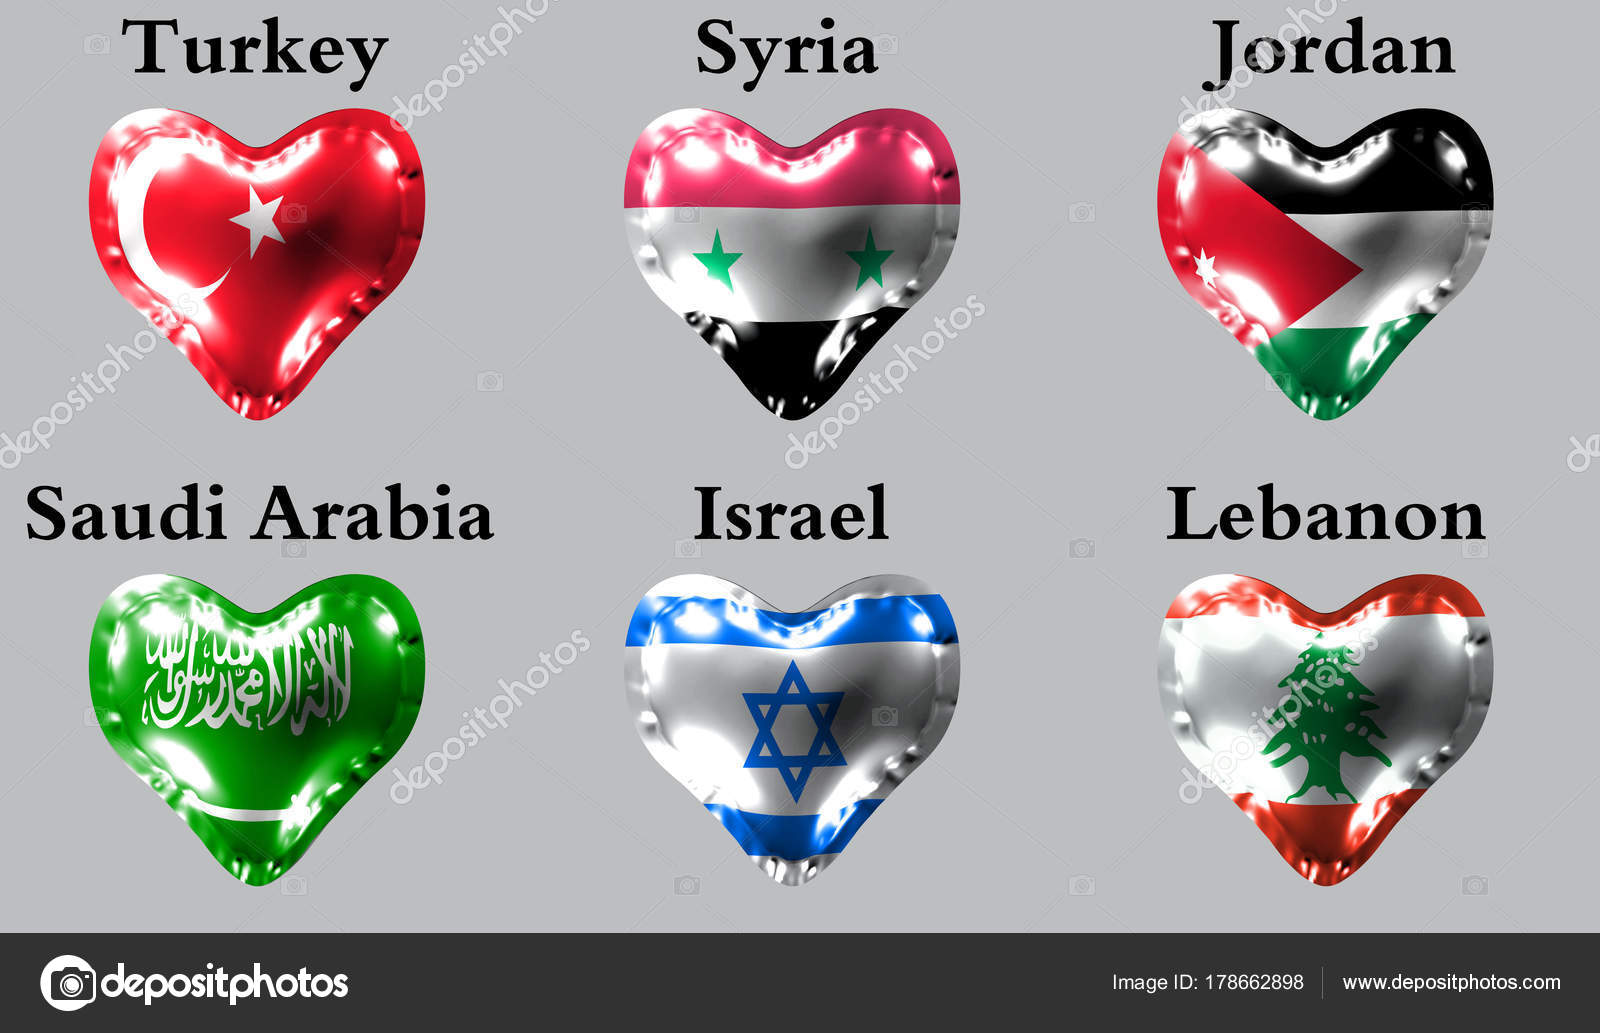 Vector Country Flag of Syria - Heart